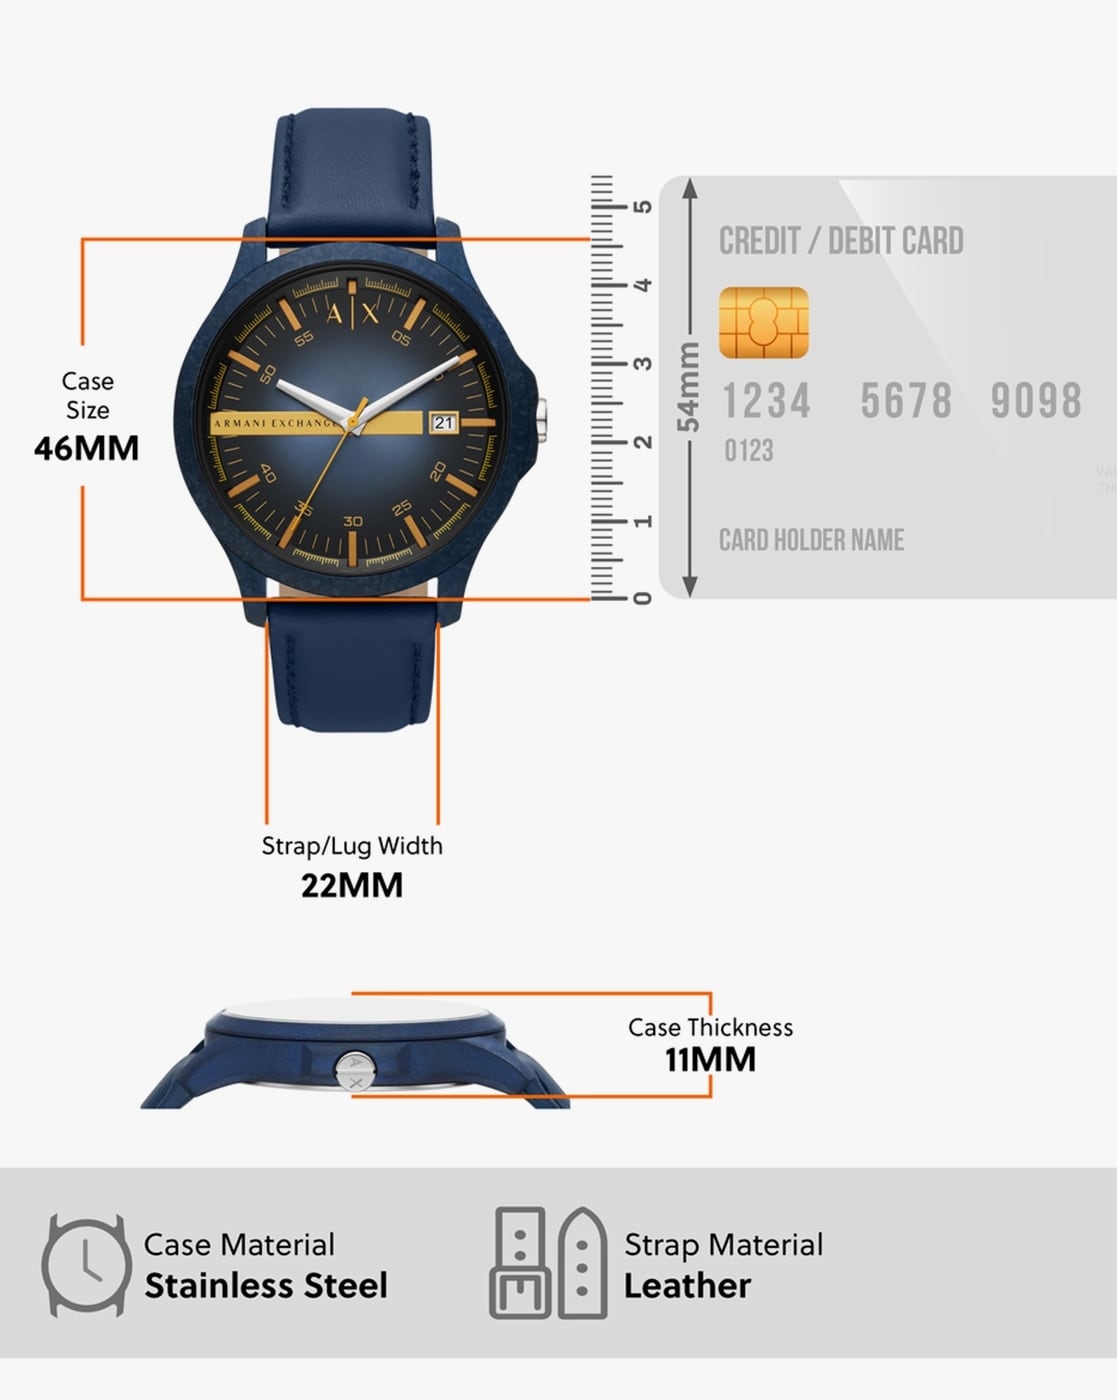 Buy Blue Watches for Men by ARMANI EXCHANGE Online